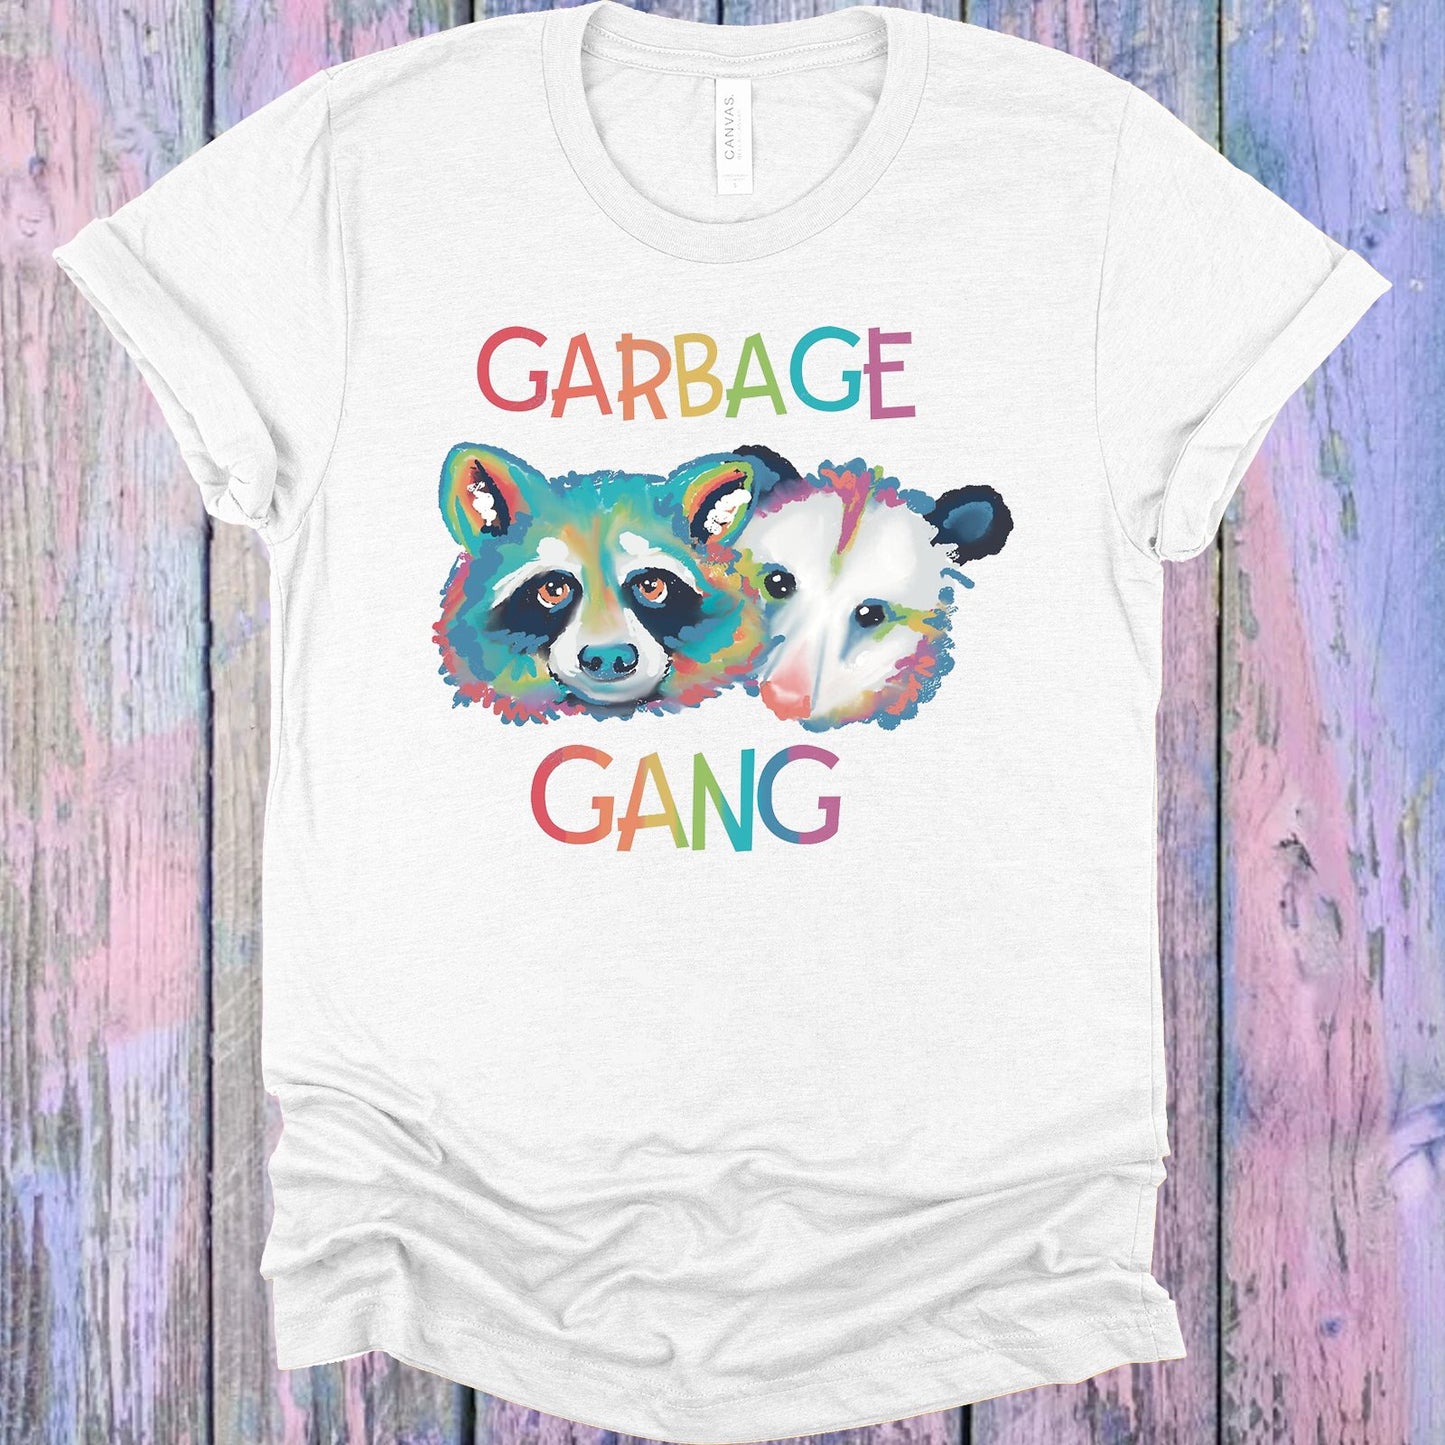 Garbage Gang Graphic Tee Graphic Tee